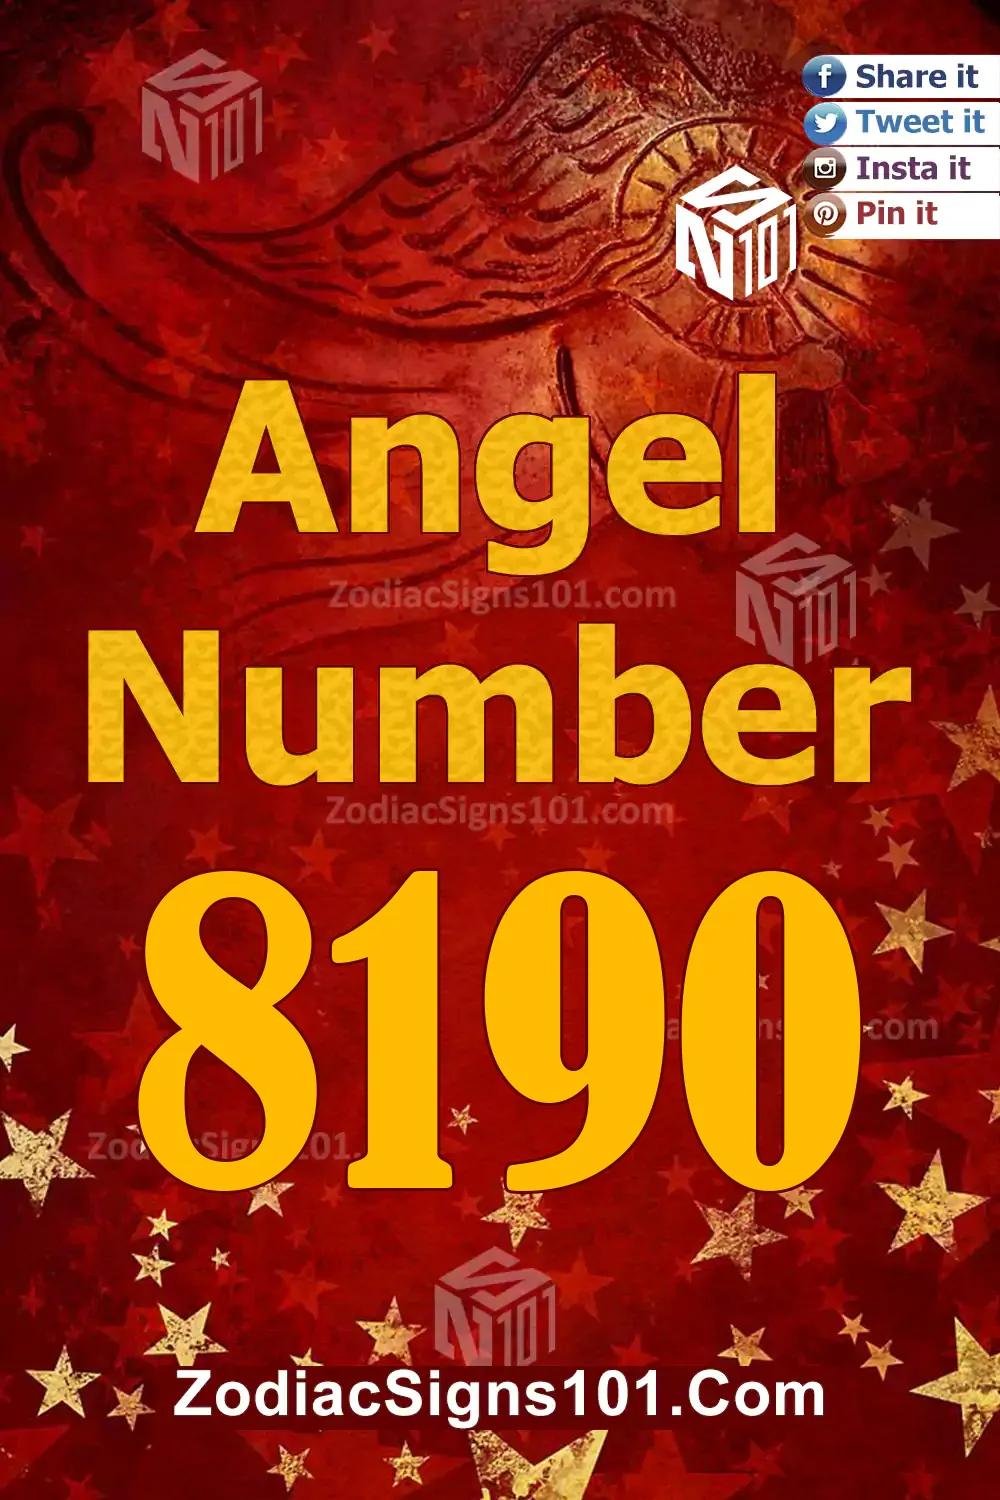 8190 Angel Number Meaning